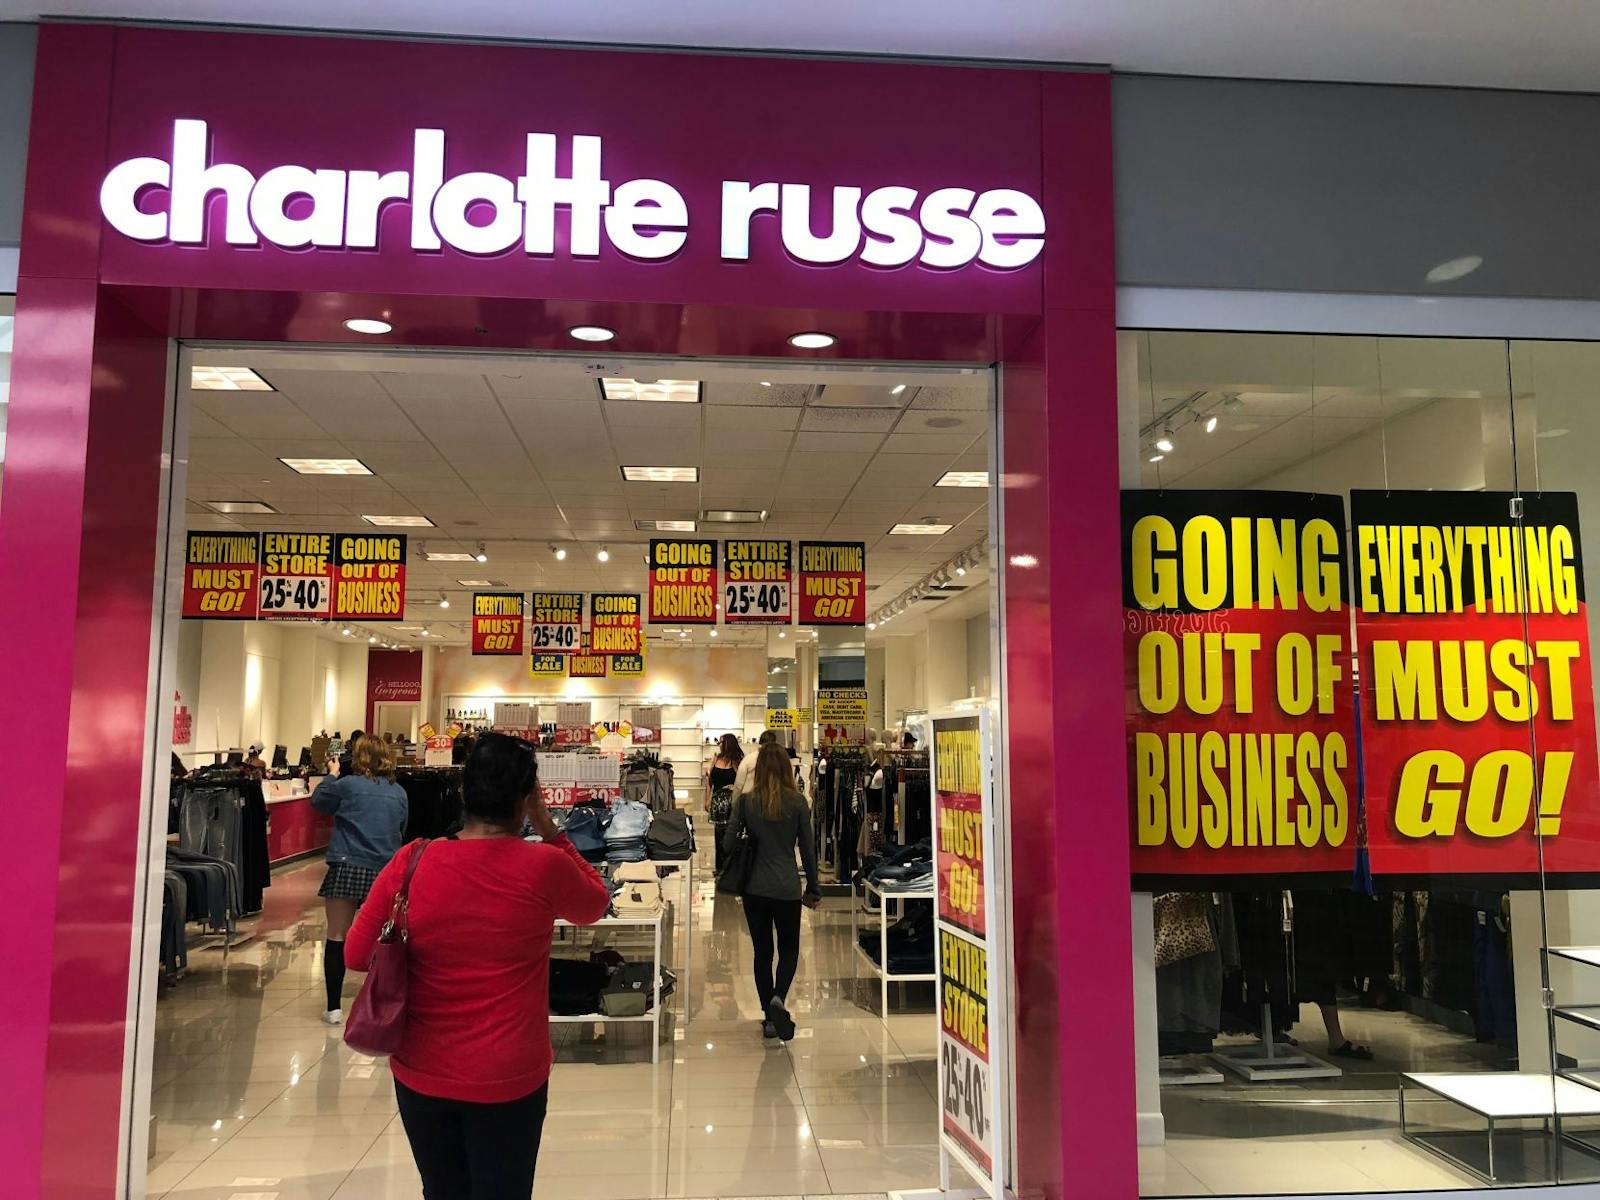 Charlotte Russe is closing all stores and going out of business